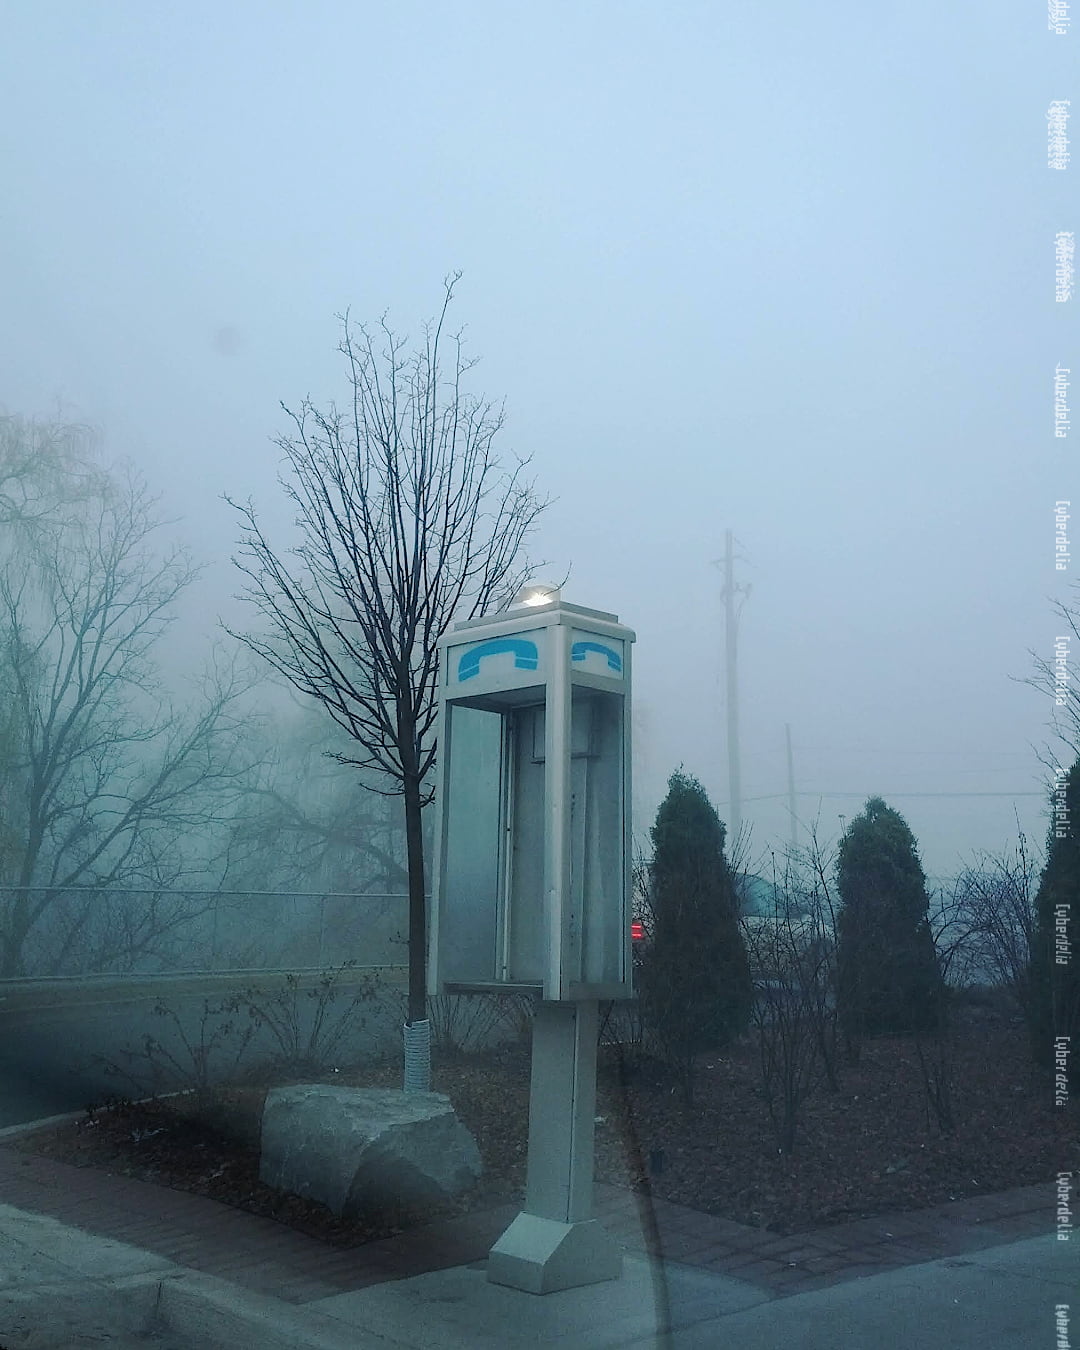 A photo of the housing of a public payphone, just the singular kind on an open stand, on the edge of a public garden, silver metal with blue and white phone symbol at top. There is no phone inside it though. It is empty. A foggy backdrop with some trees in the distance slightly visible.